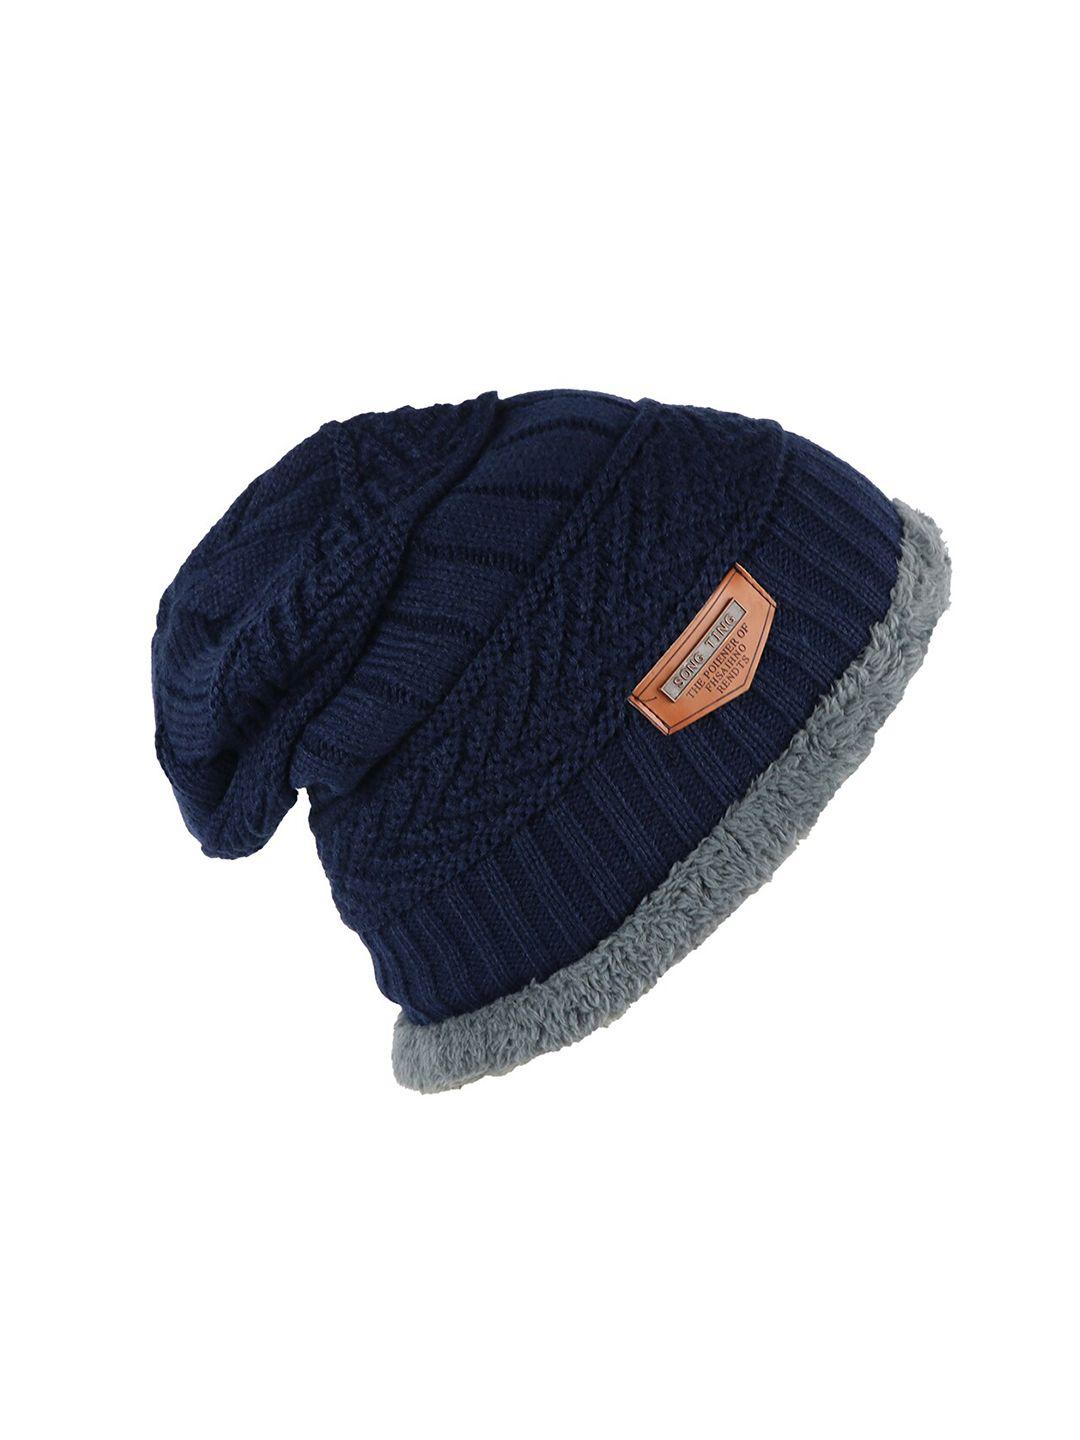 isweven unisex navy blue winter beanie cap with inner fur